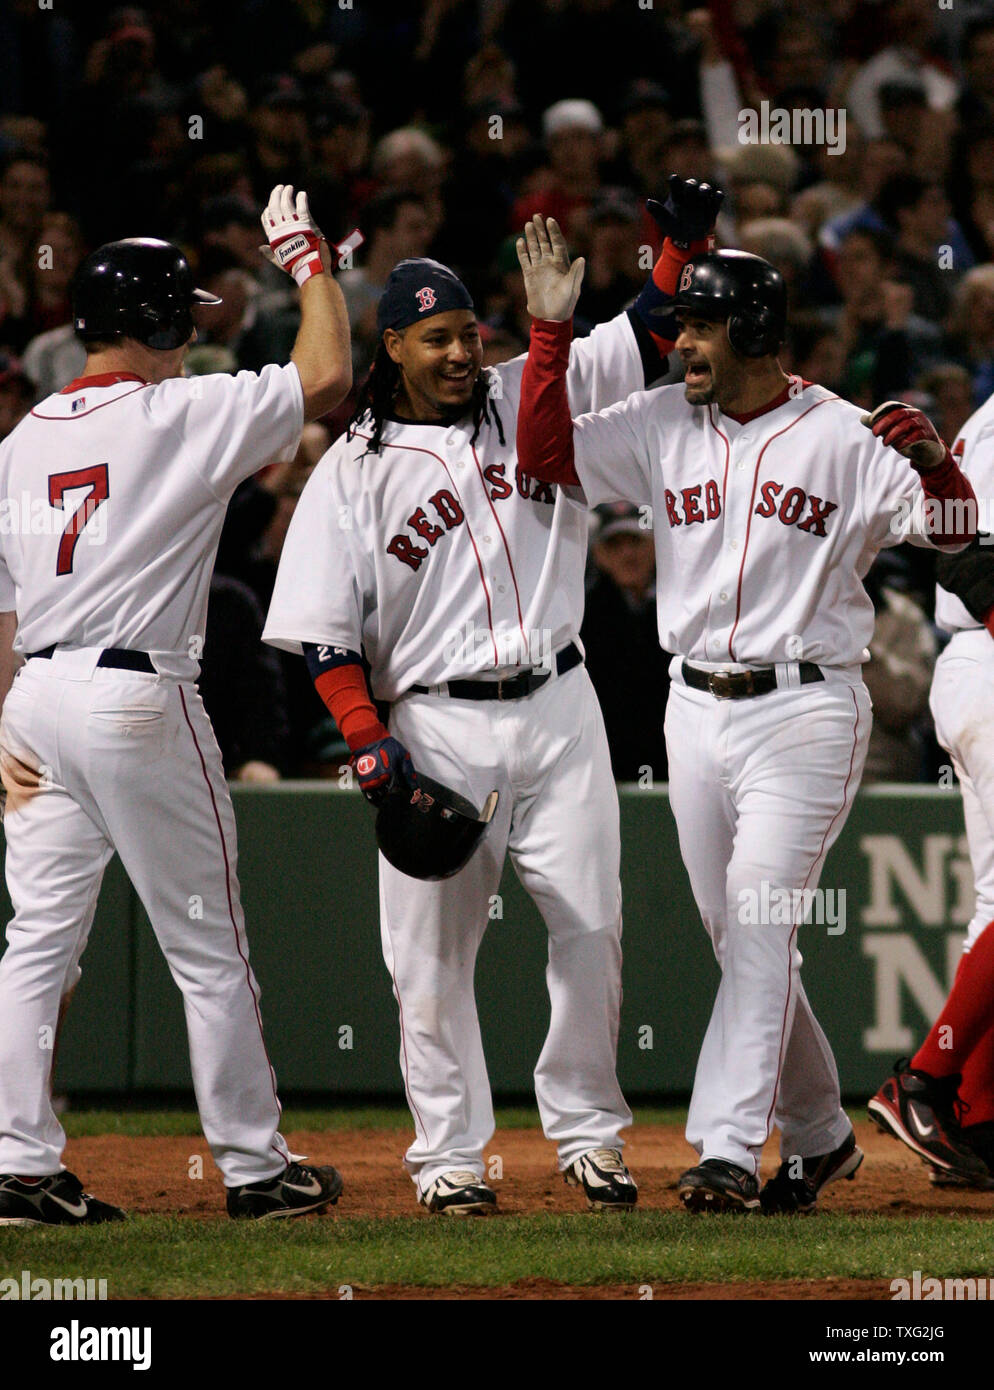 Boston Red Sox third baseman Mike Lowell (R) is patted on the head by left  fielder Manny Ramirez (C) and given a high five by right fielder J.D. Drew  after Lowell hit